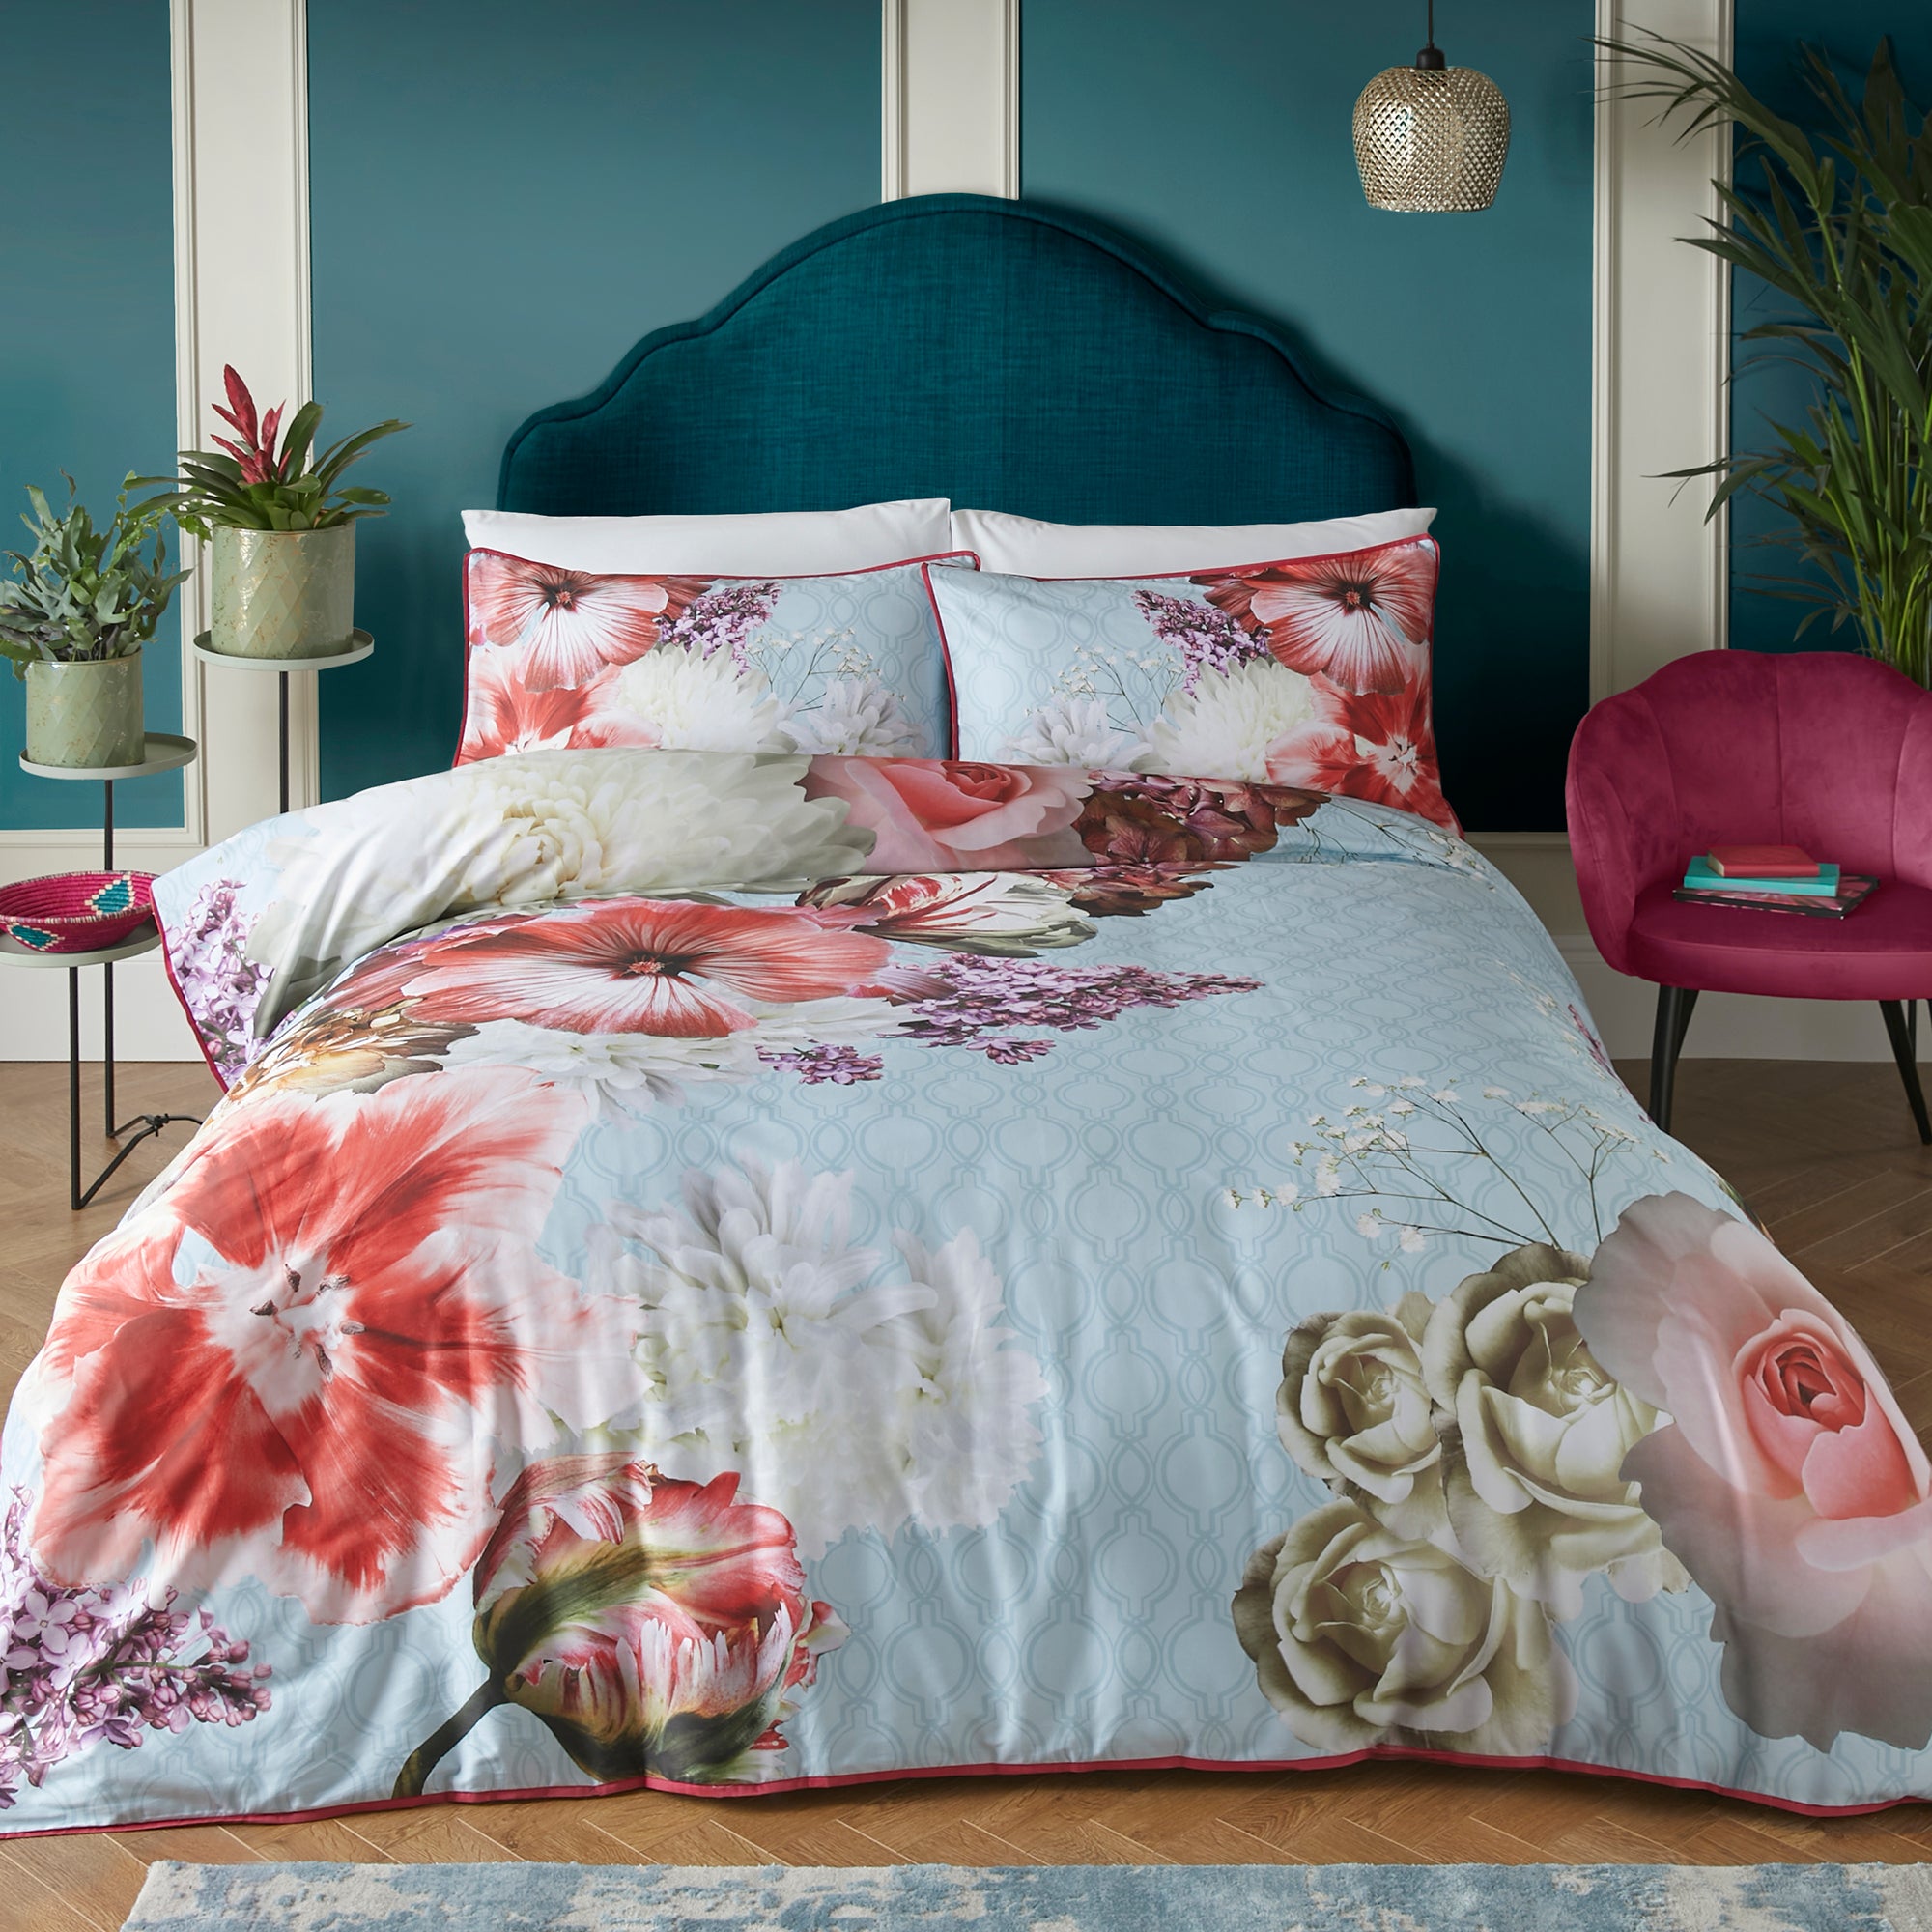 Laurence Llewelyn-Bowen Mayfair Lady Cotton Duvet Cover and Pillowcase Set